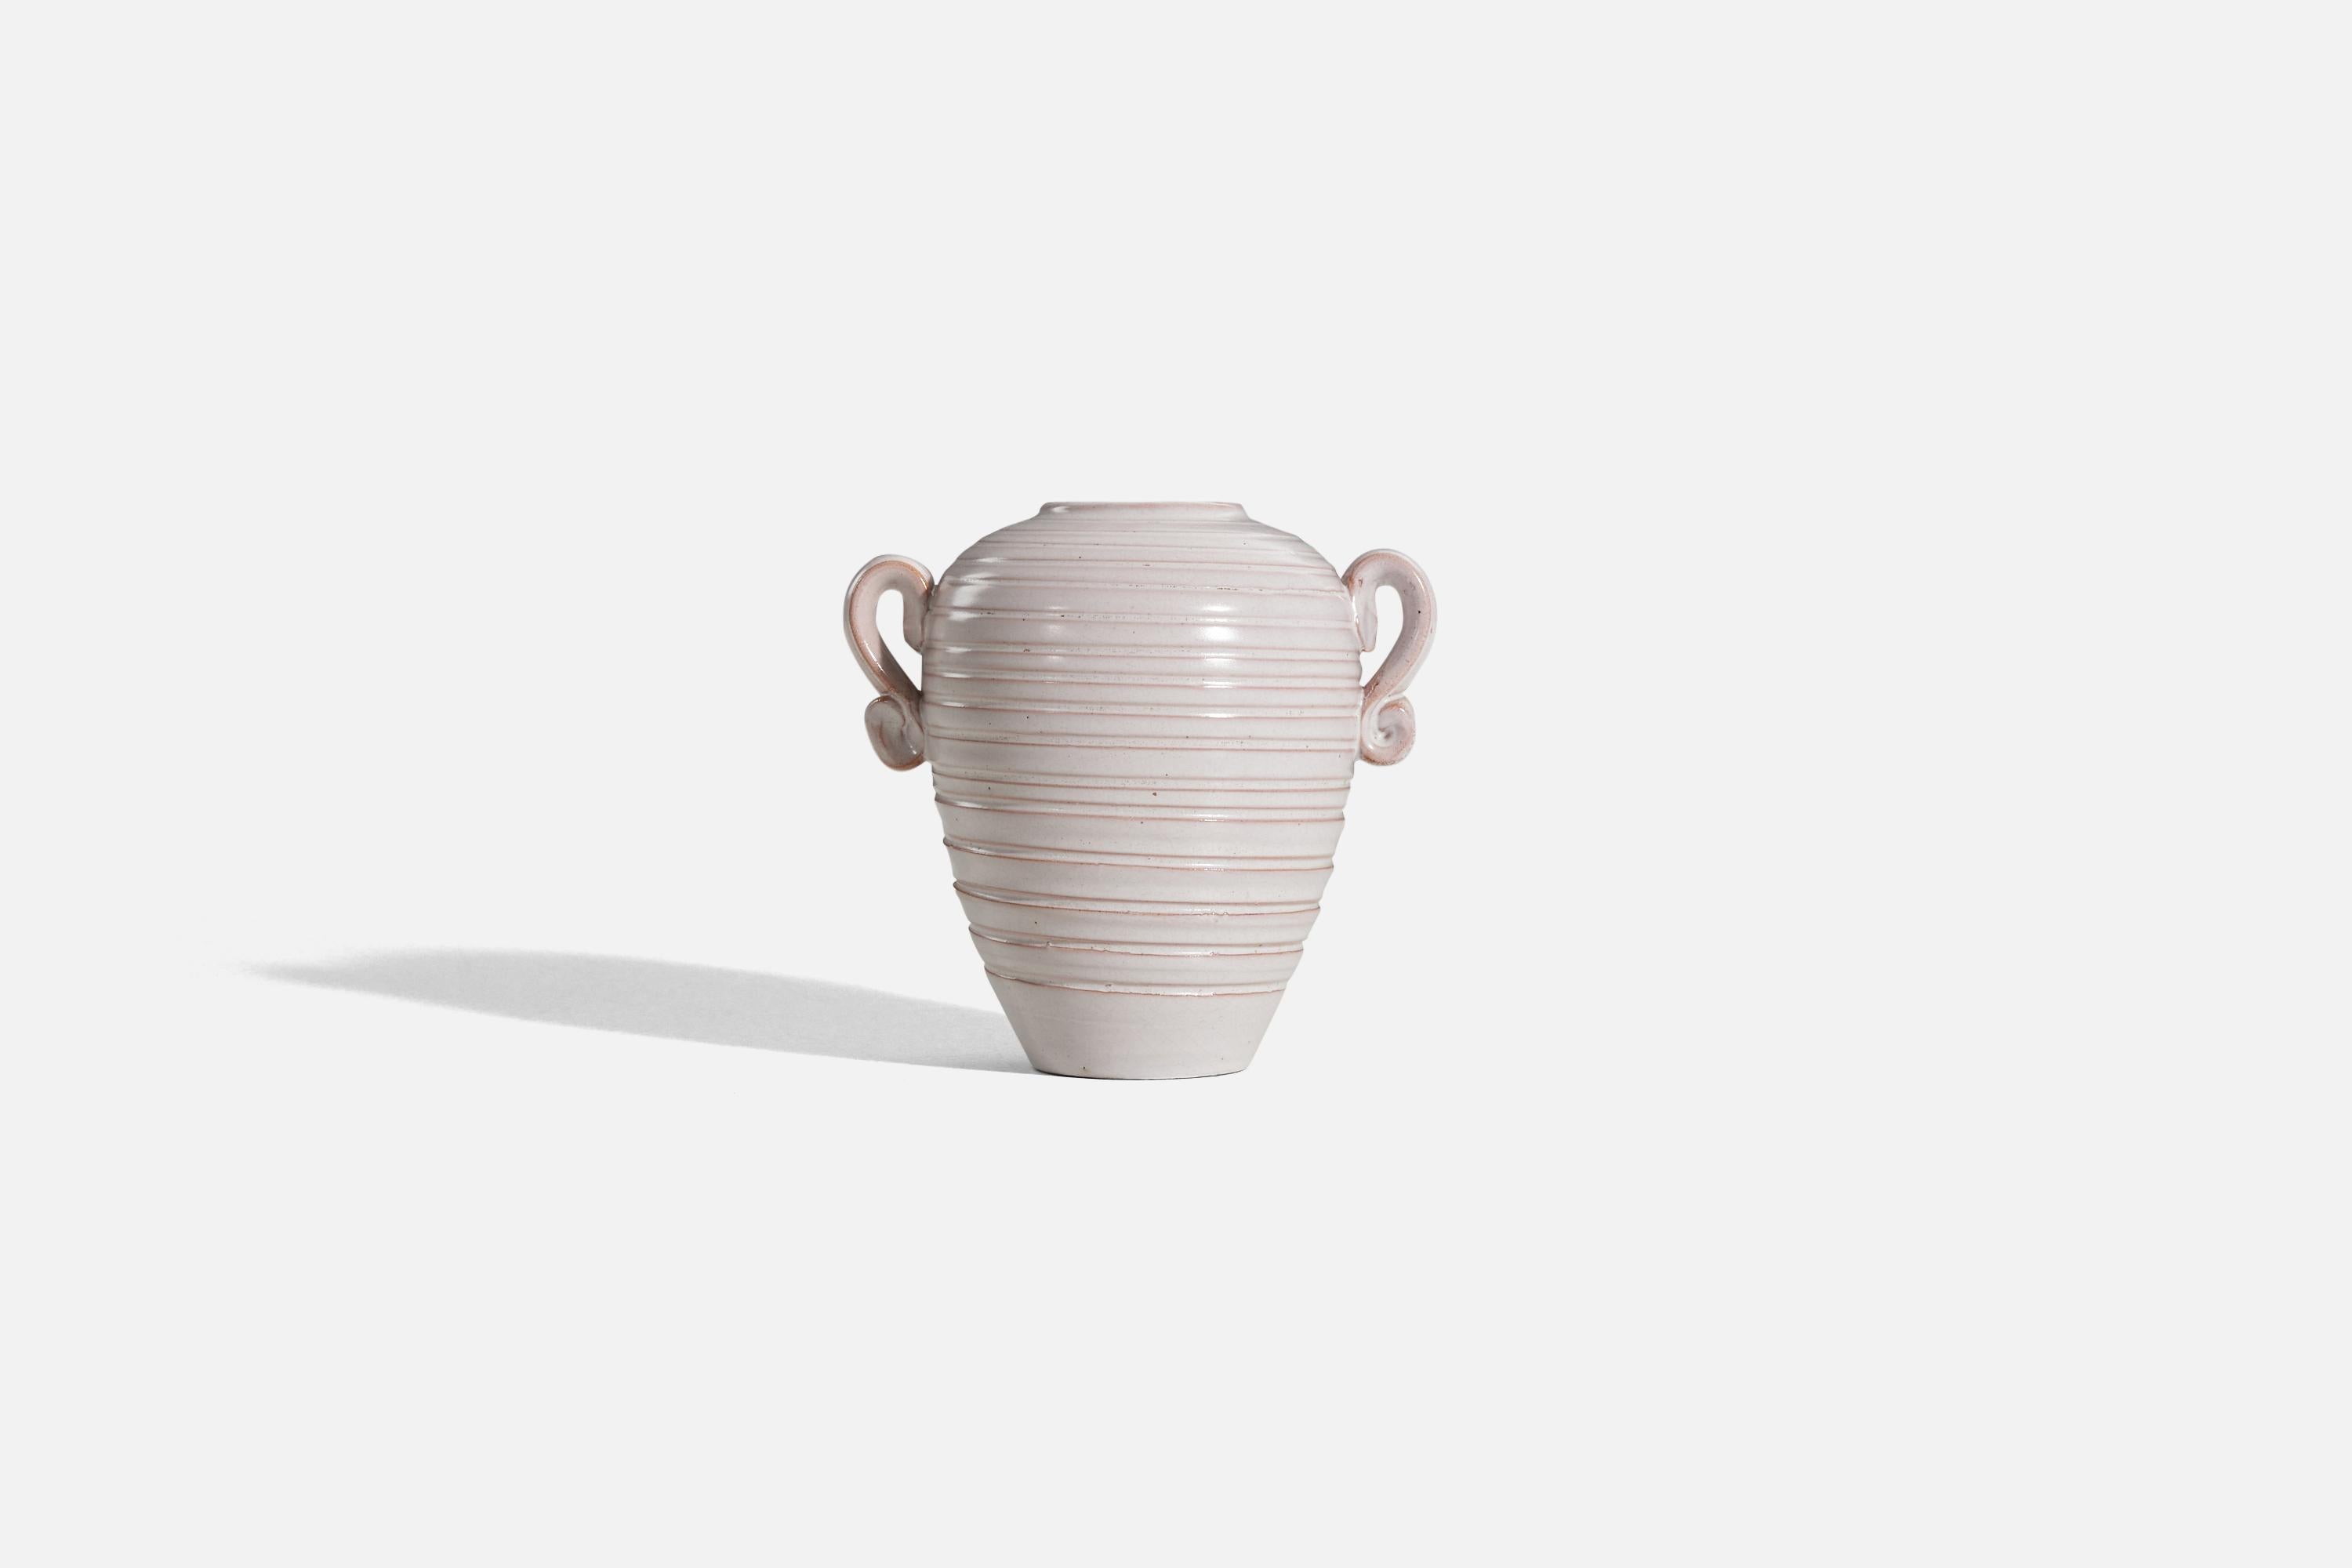 A white and pink-glazed earthenware vase designed and produced by Gabriel Keramik, Sweden, c. 1930s.